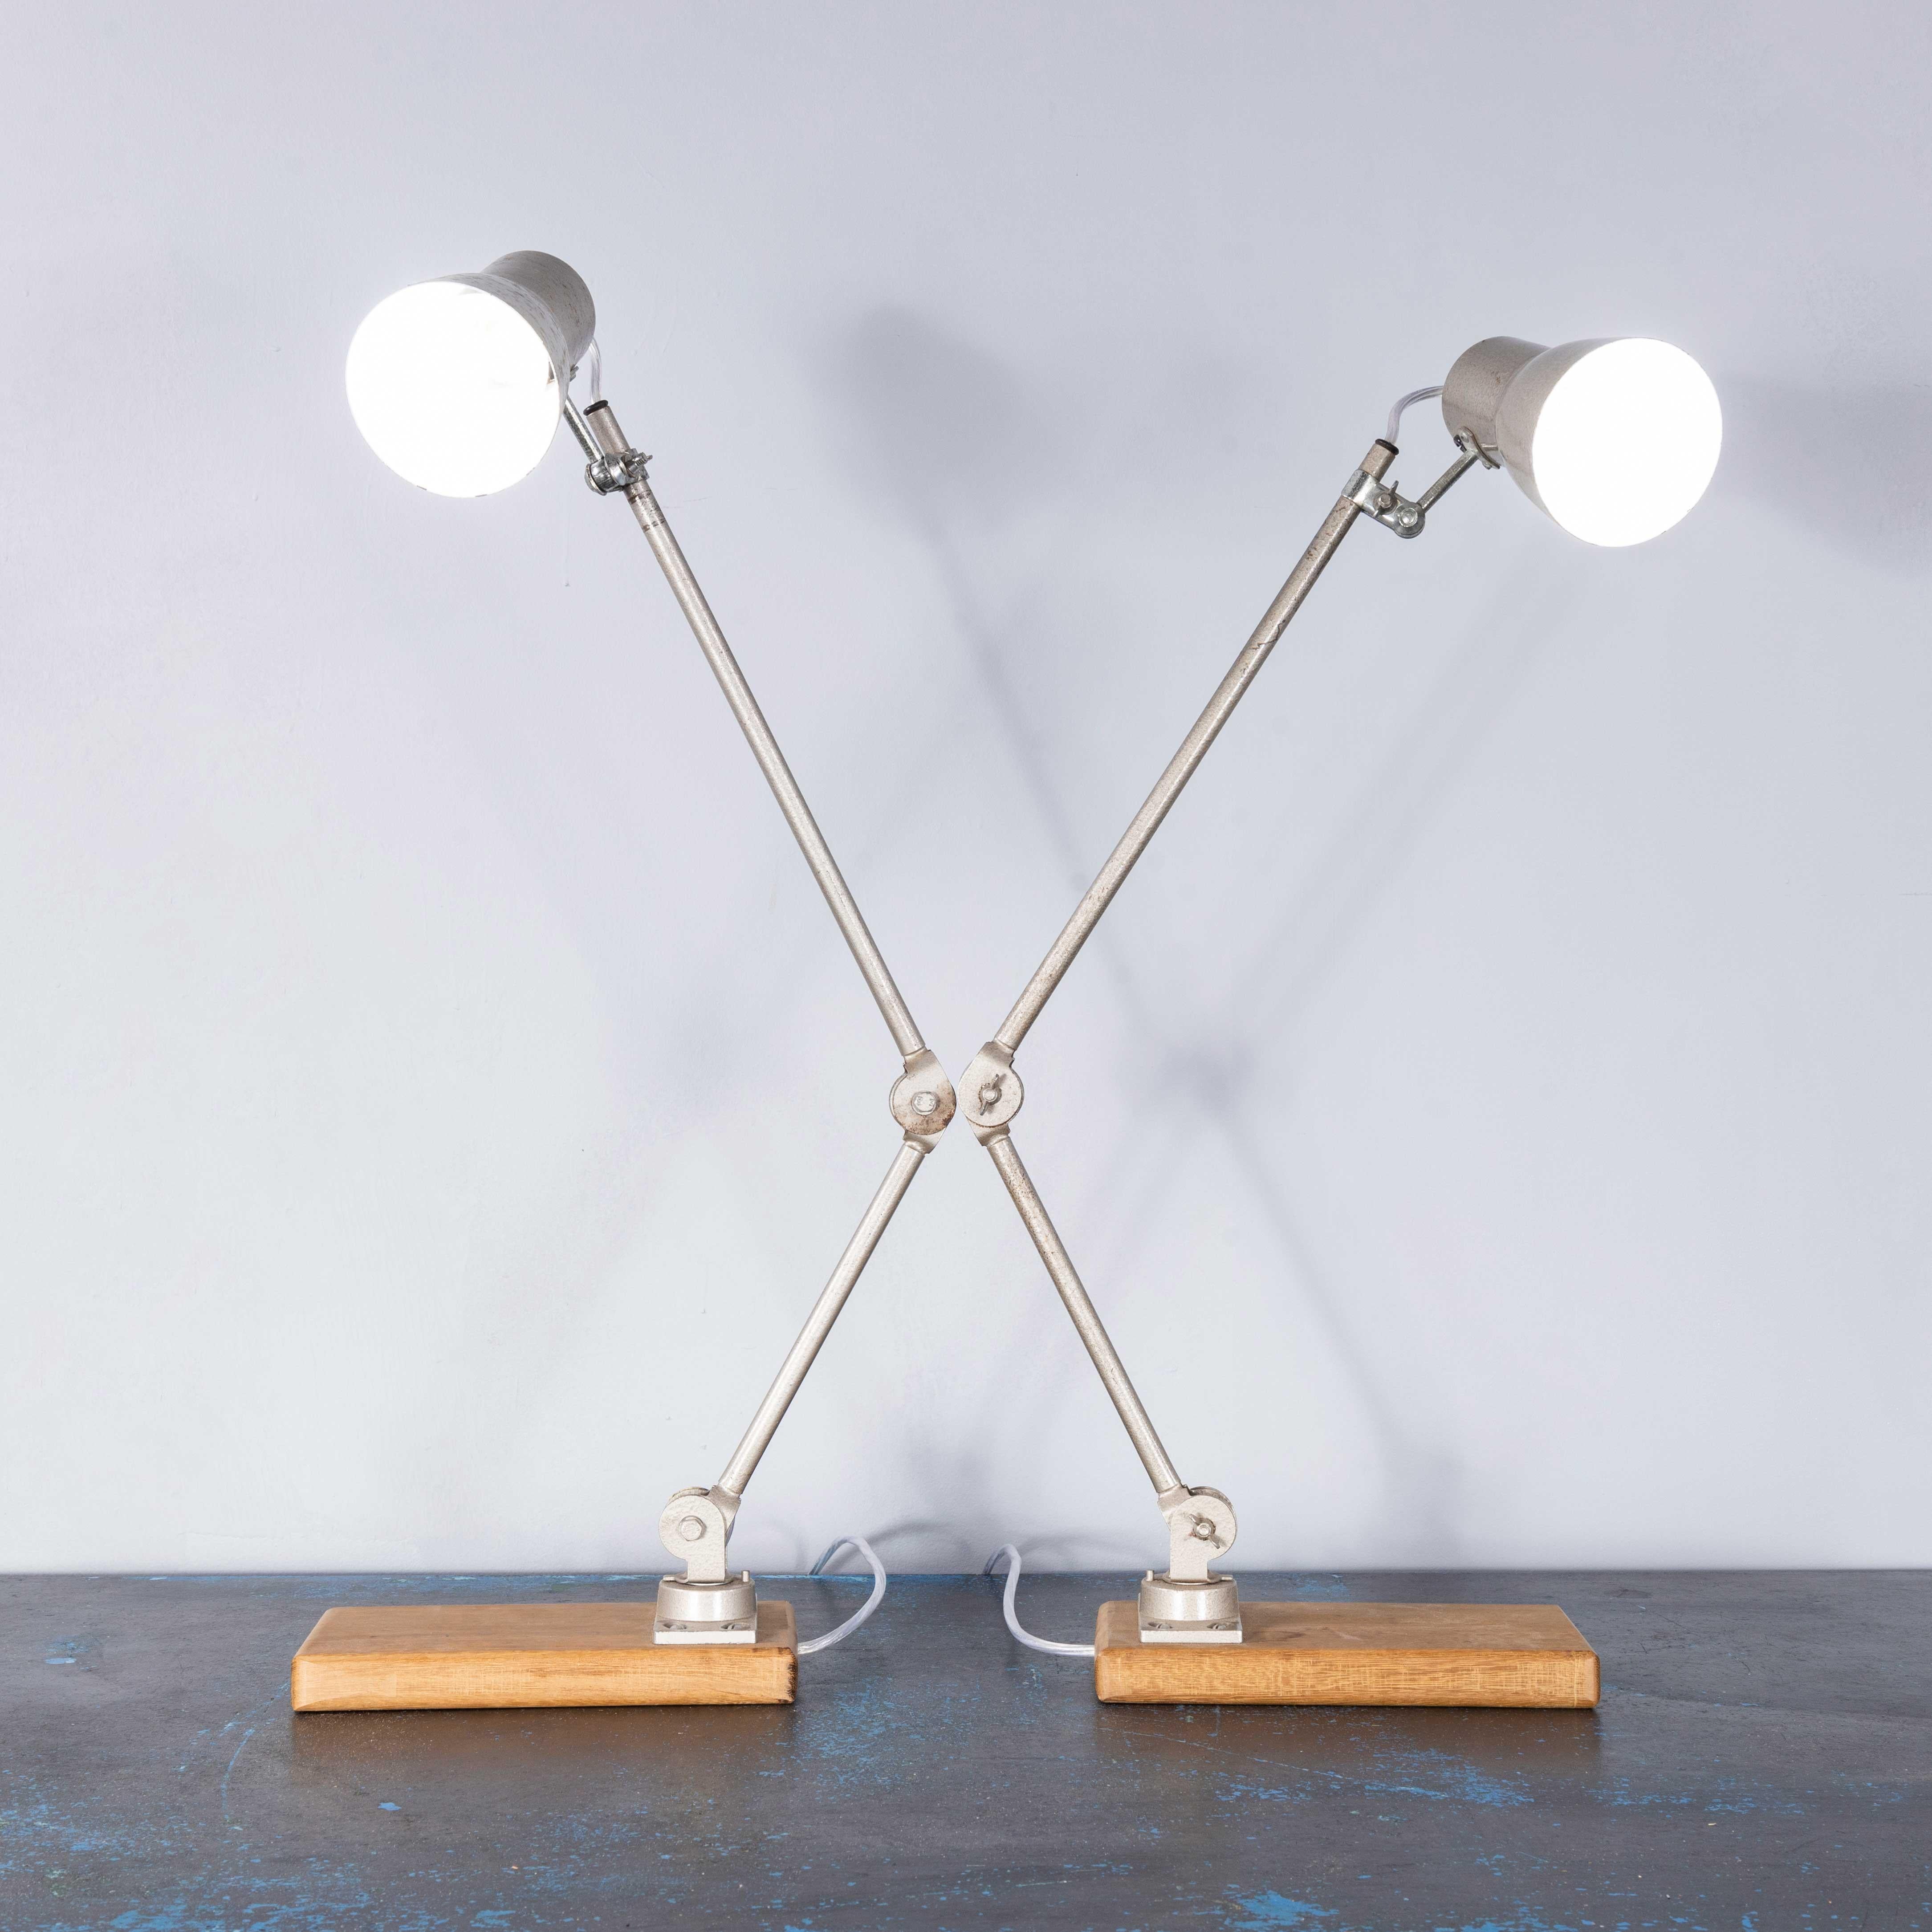 1950's Original Articulated Machinists Desk Lamps By EDL - Pair 2